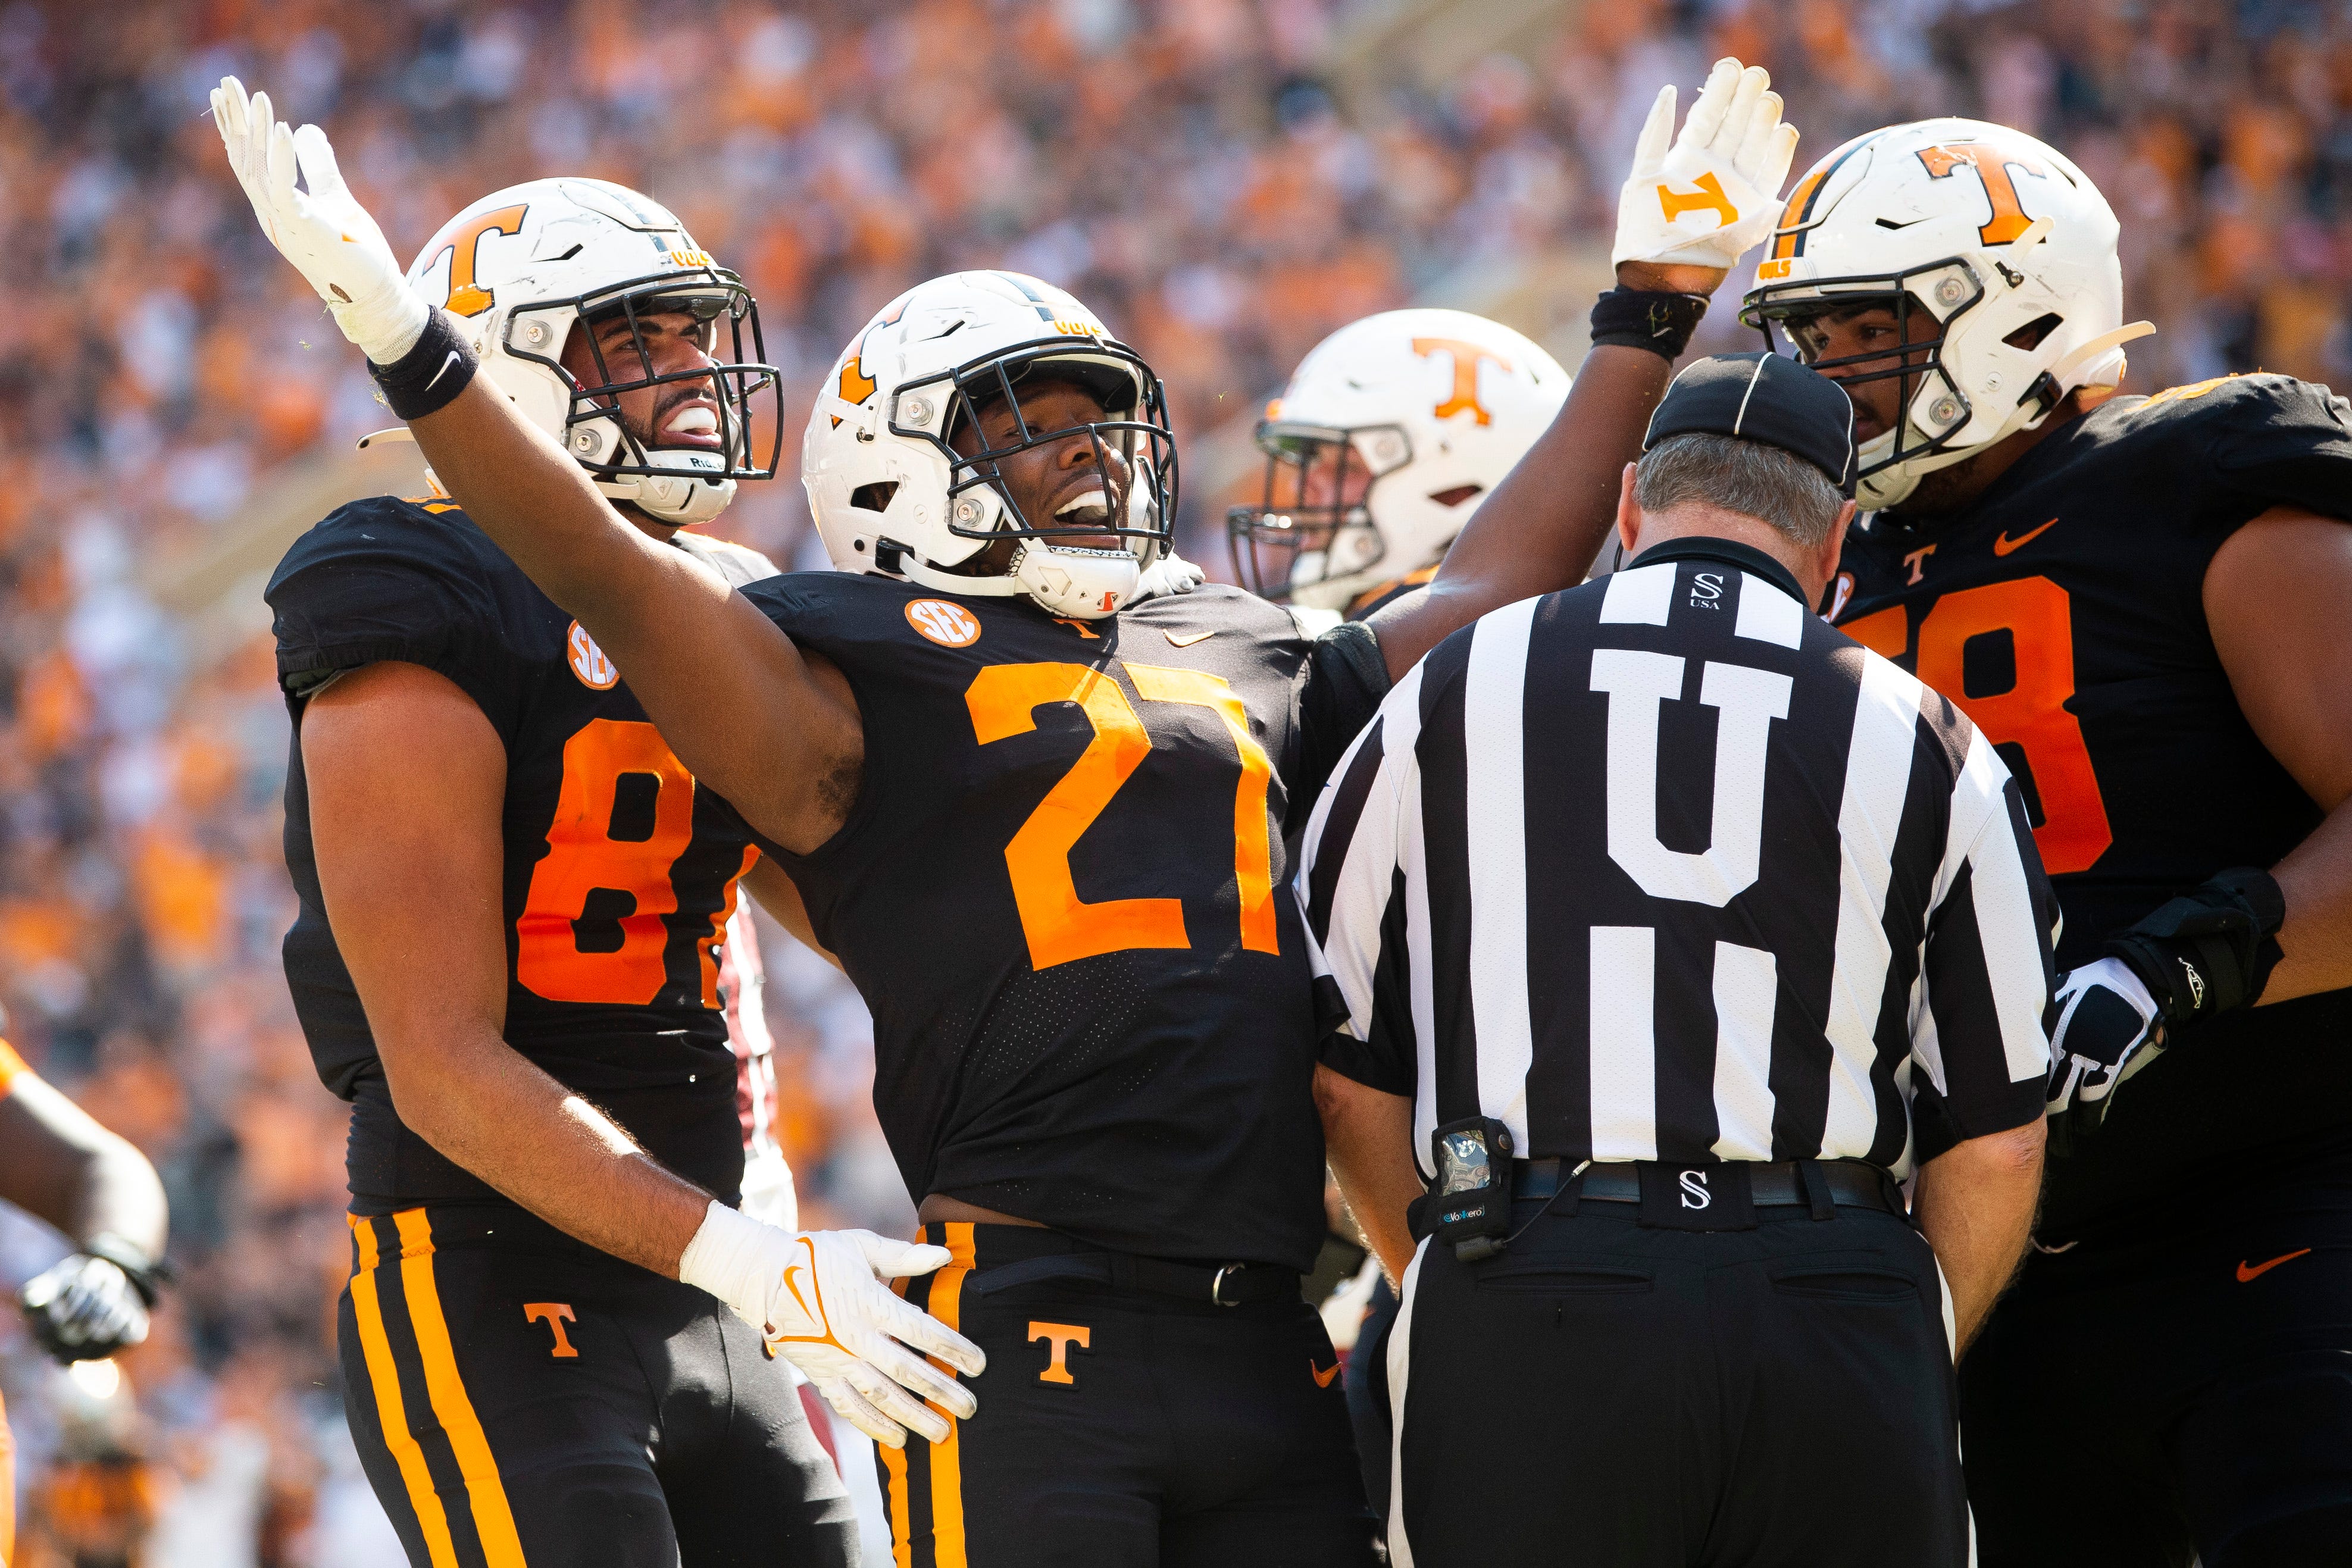 Tennessee football game vs South Carolina is crucial for UT Vols